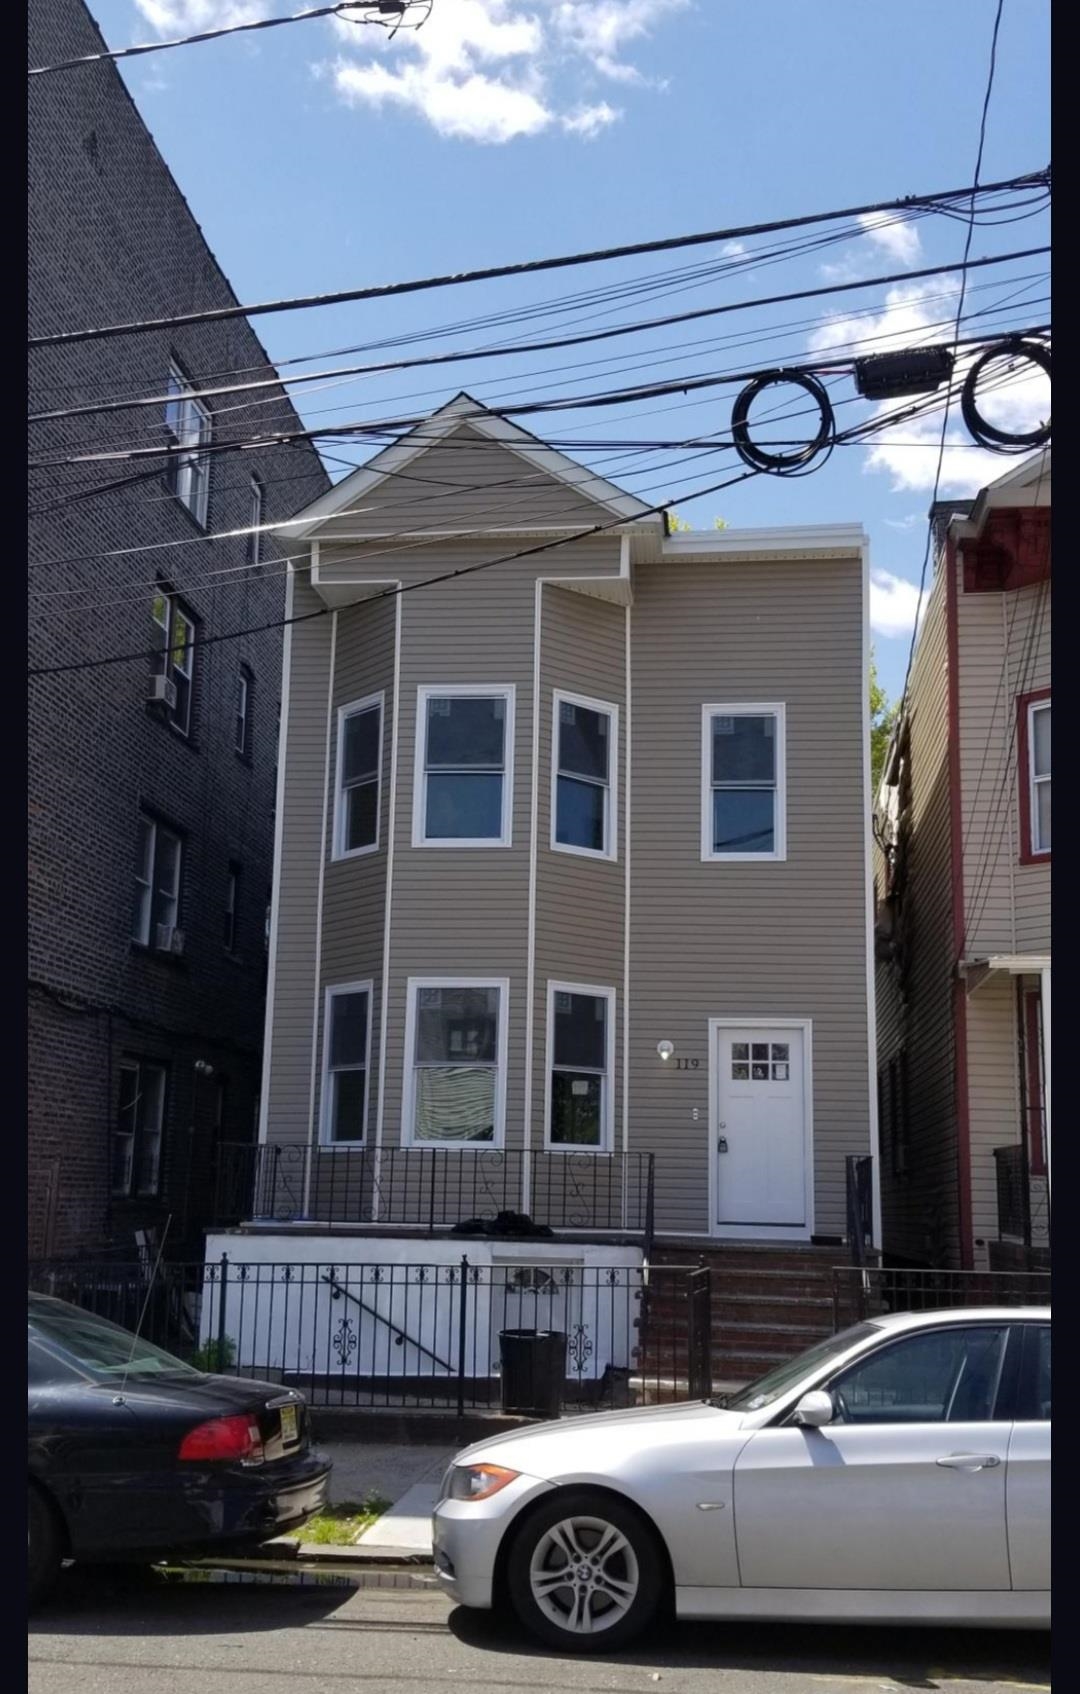 # 240004498 - For Rent in JERSEY CITY - Greenville NJ